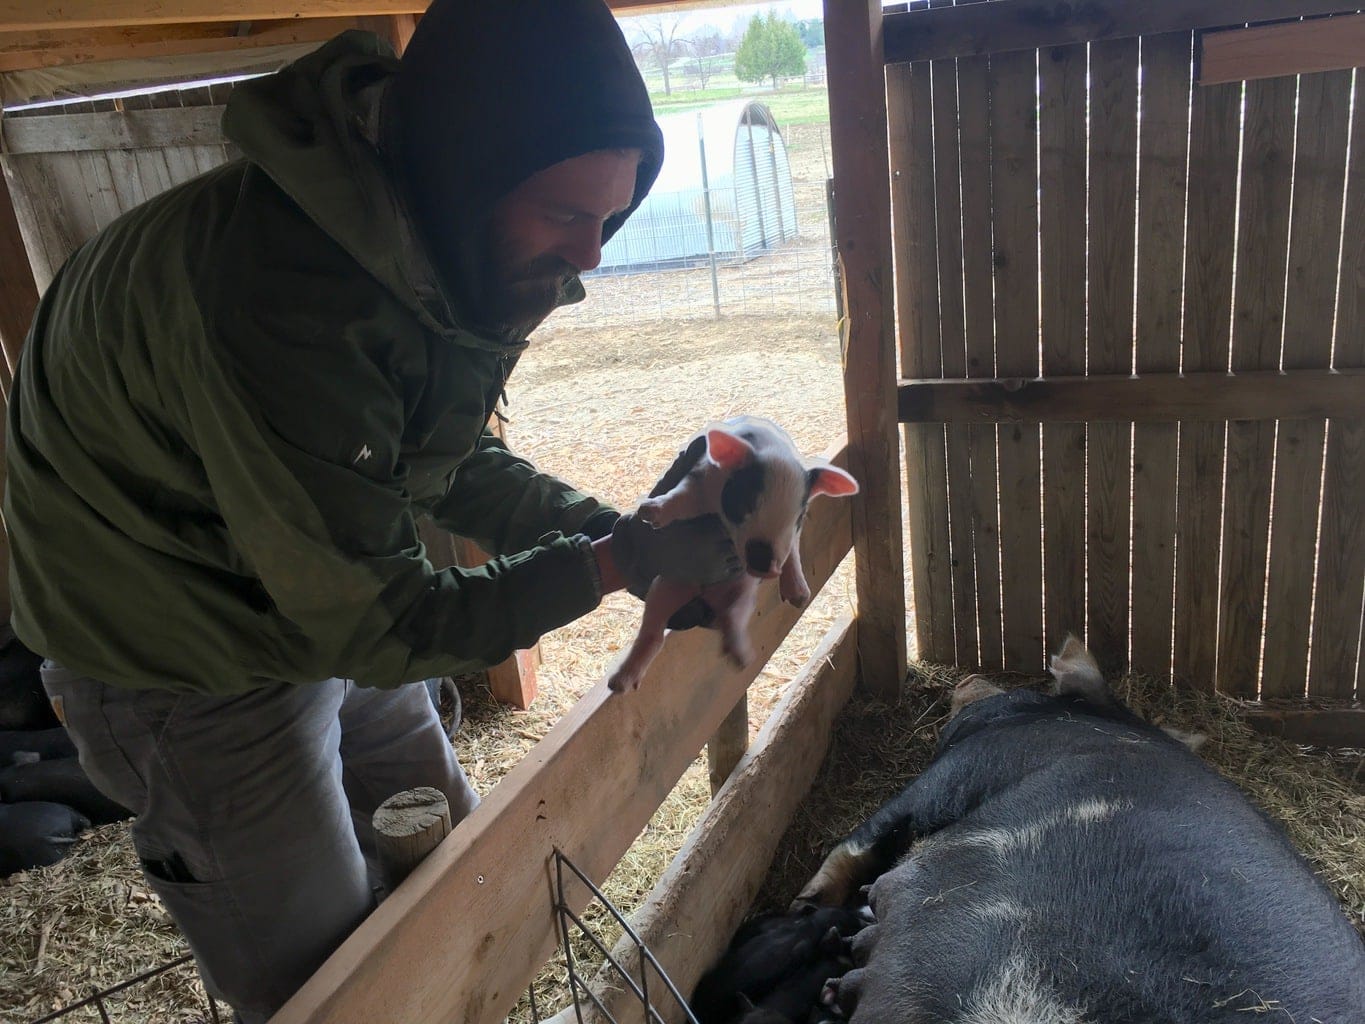 Piglets arrive across the year at the biodynamic and organic certified Black Cat Farm, which supplies the farm-to-table restaurants Black Cat Bistro and Bramble & Hare with food.